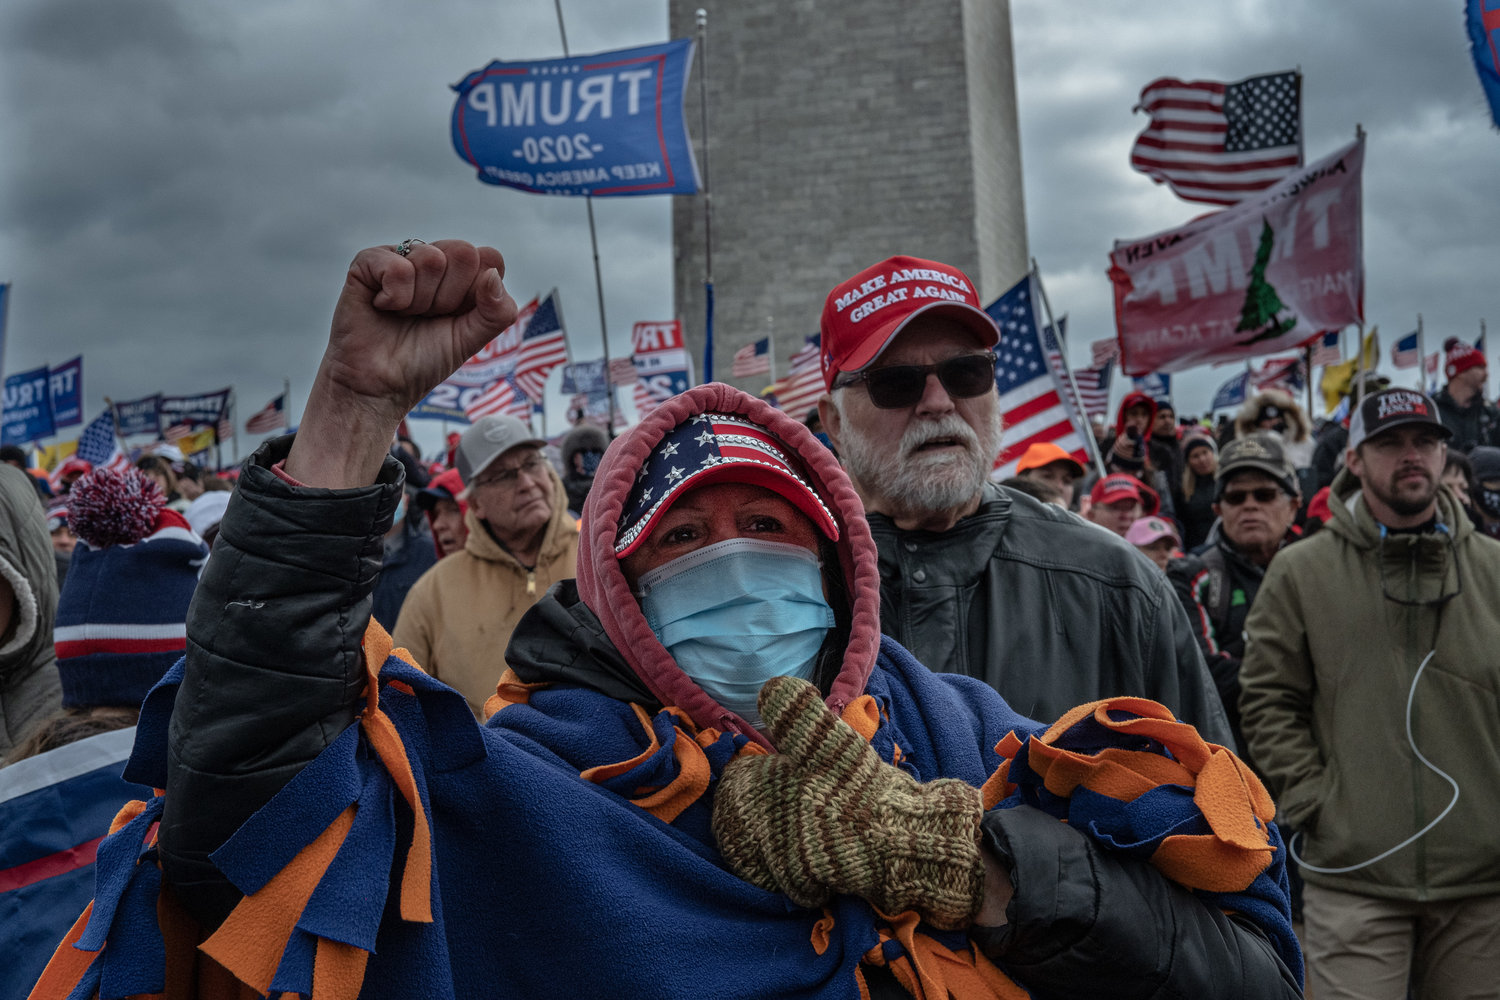 Supporters of Donald J. Trump gathered in Washington, D.C. on January 6th for a "Stop the Steal" rally, where they listened to the 45th president speak. (Photo by Chris Jones, courtesy of Report for America)